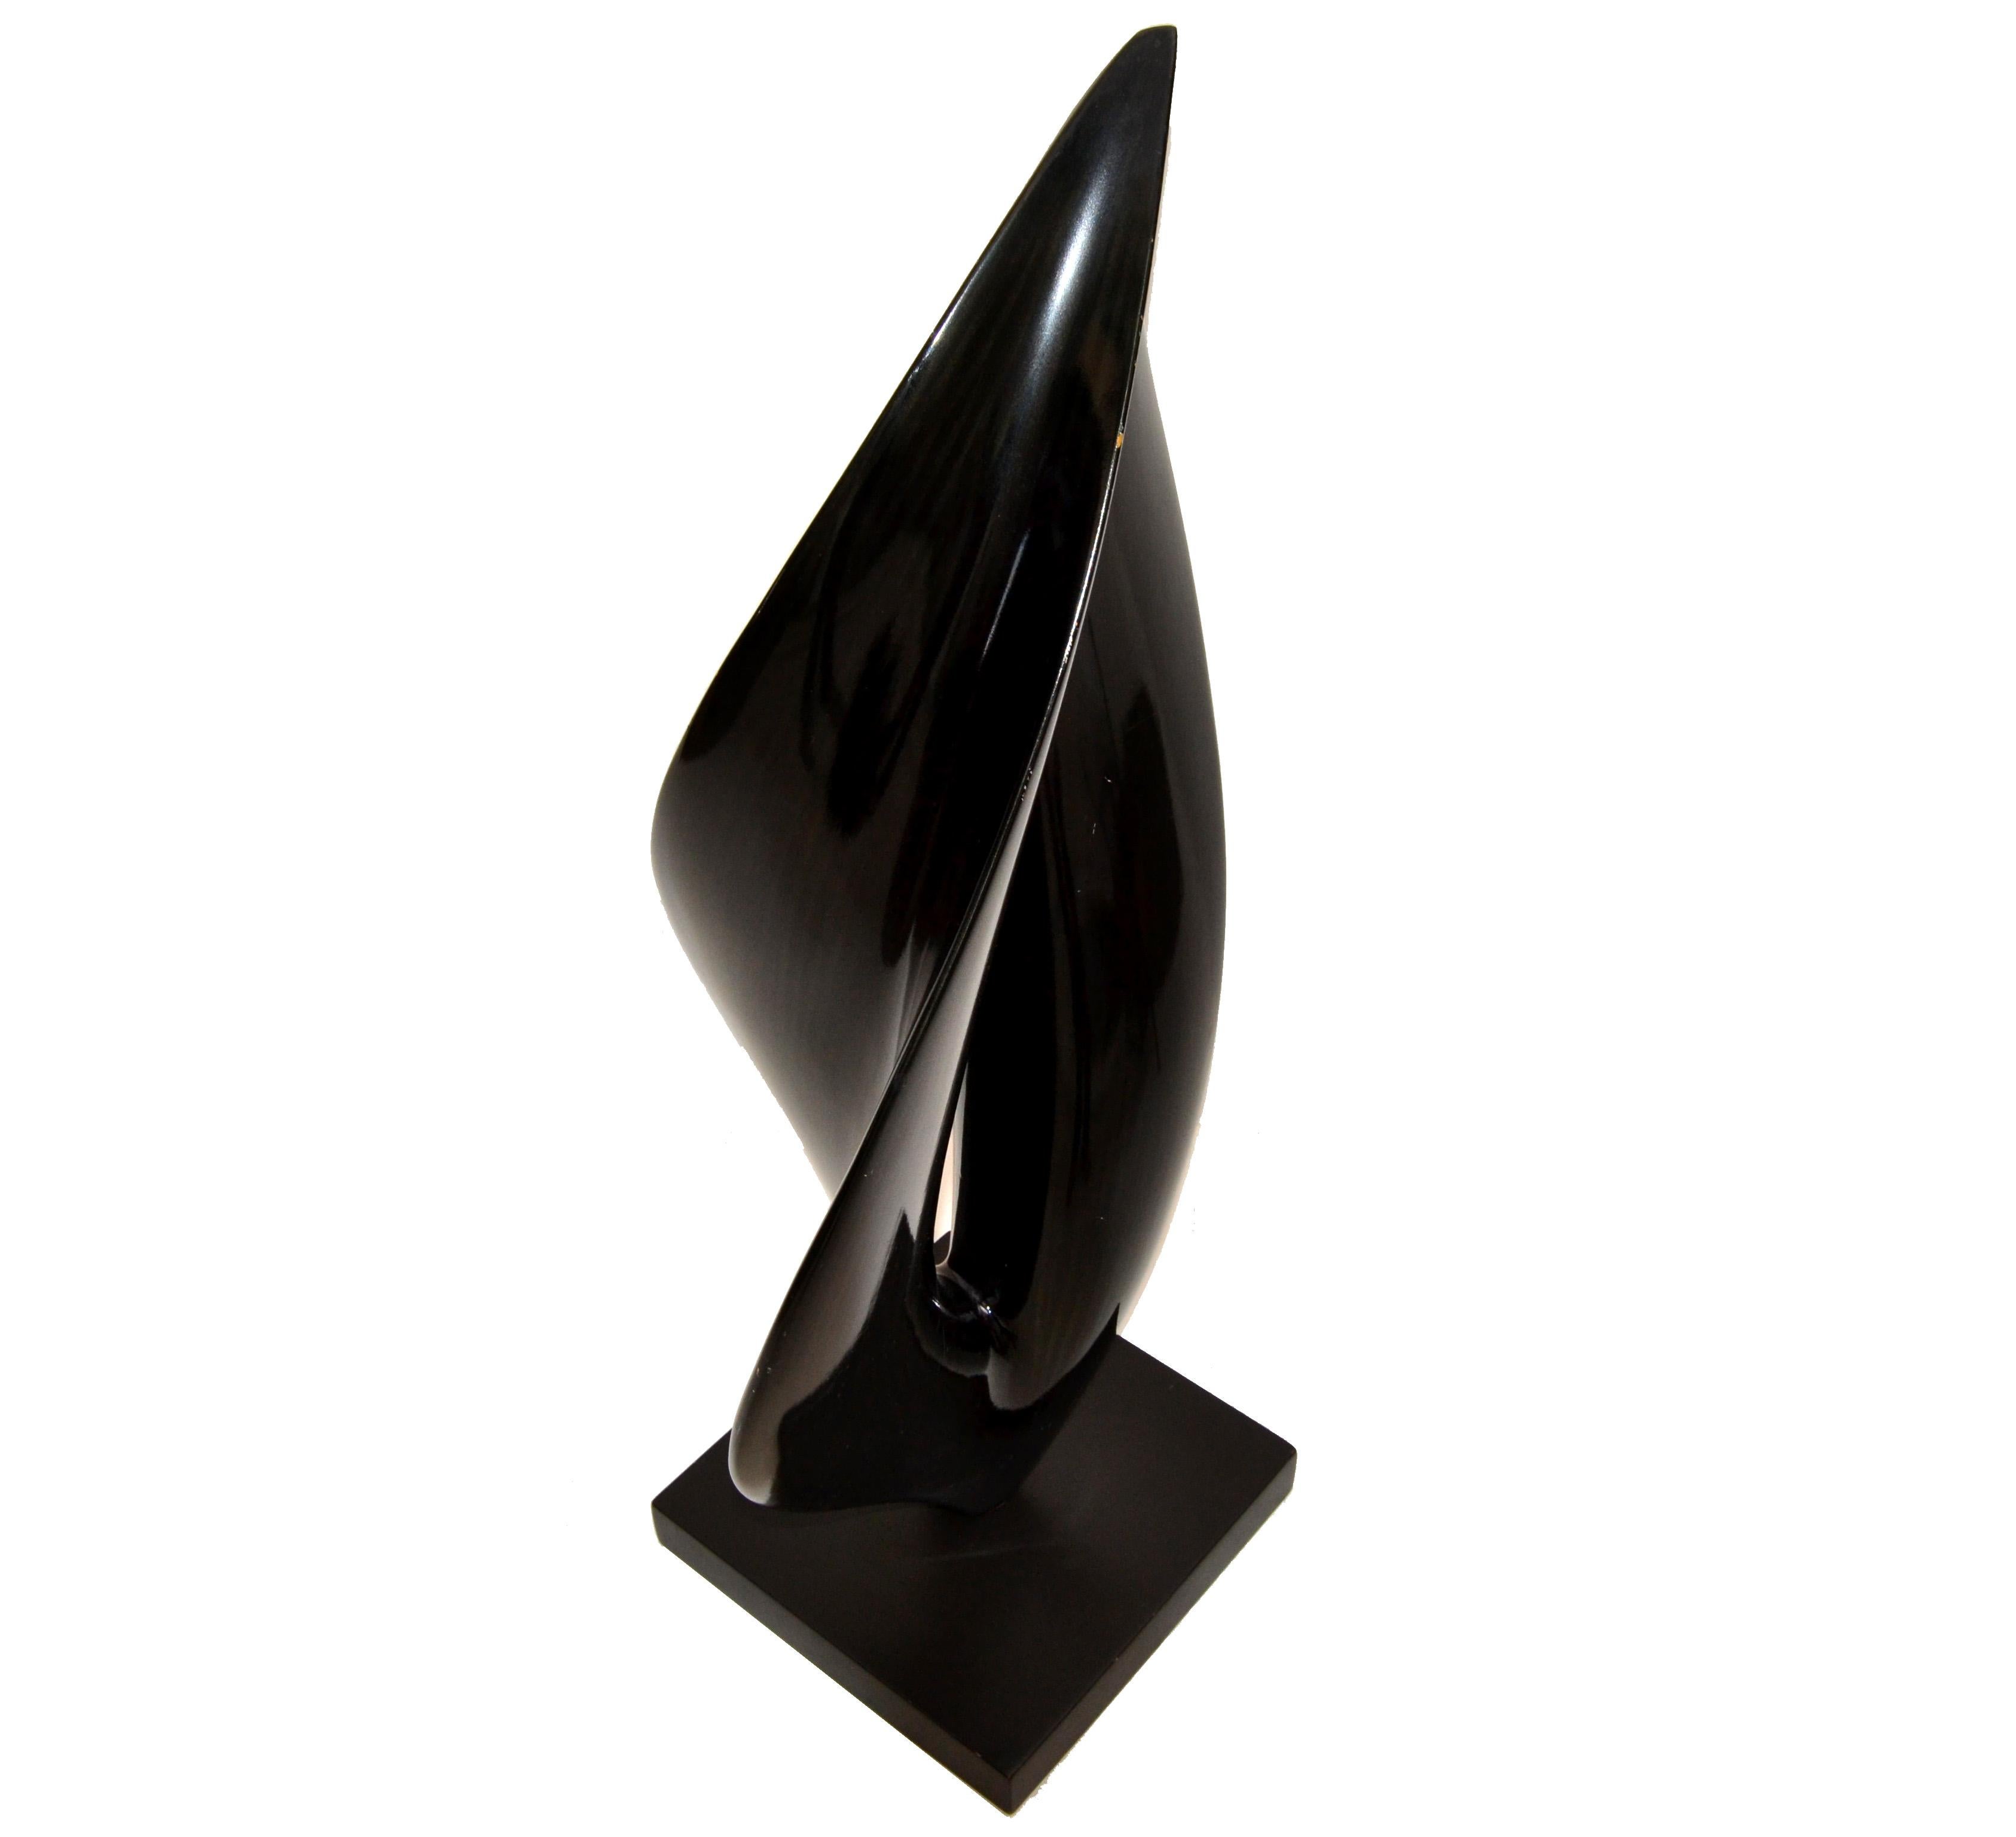 Black Lacquer Sculptural Wood Mid-Century Modern Fine Art Sculpture Square Base In Good Condition For Sale In Miami, FL